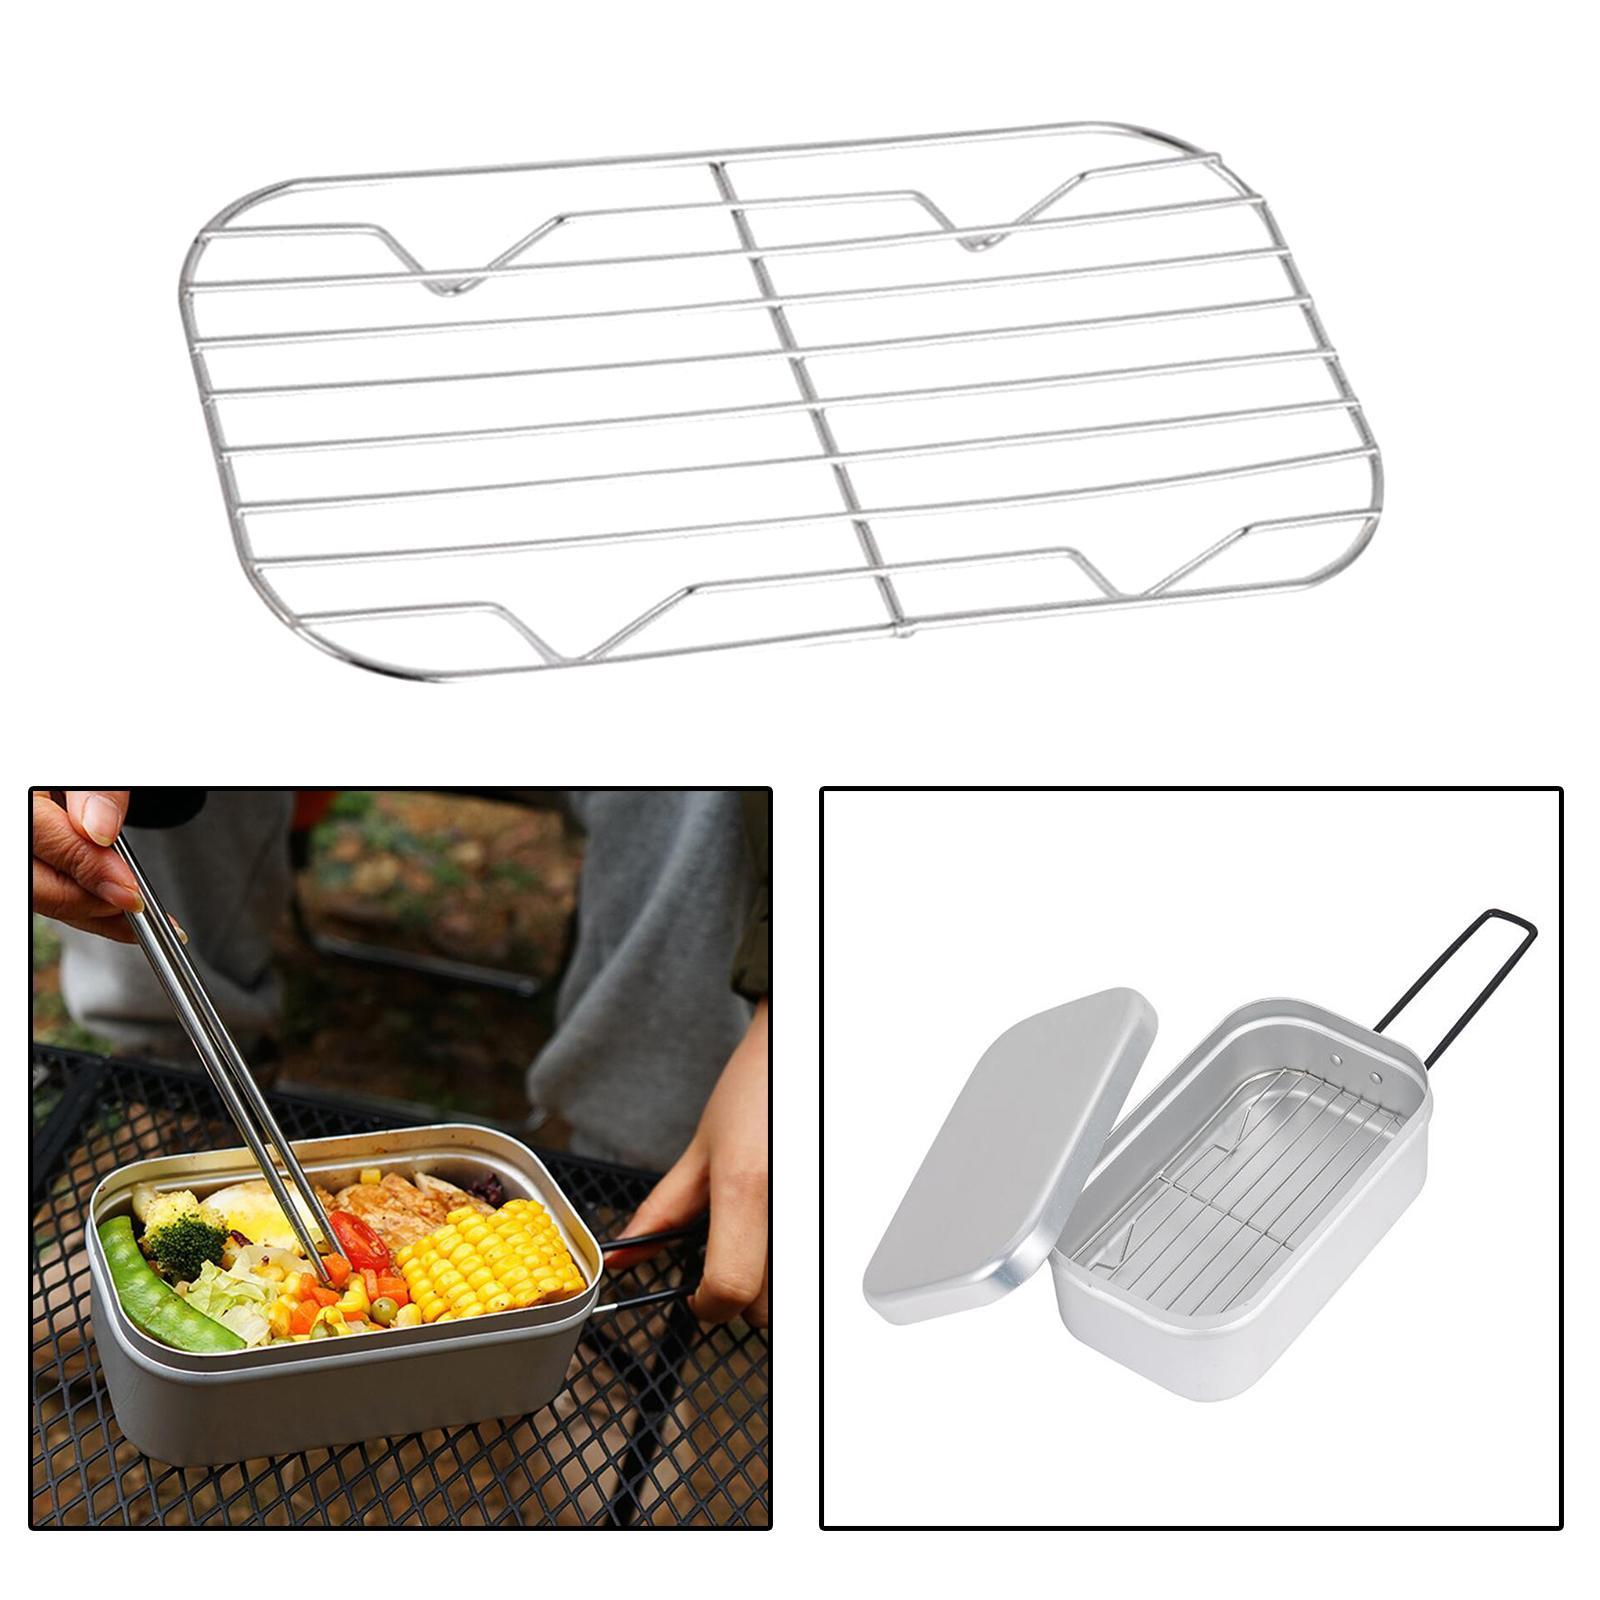 Outdoor Bento Lunch Box Steaming Rack Food Container Cooking Steaming Rack